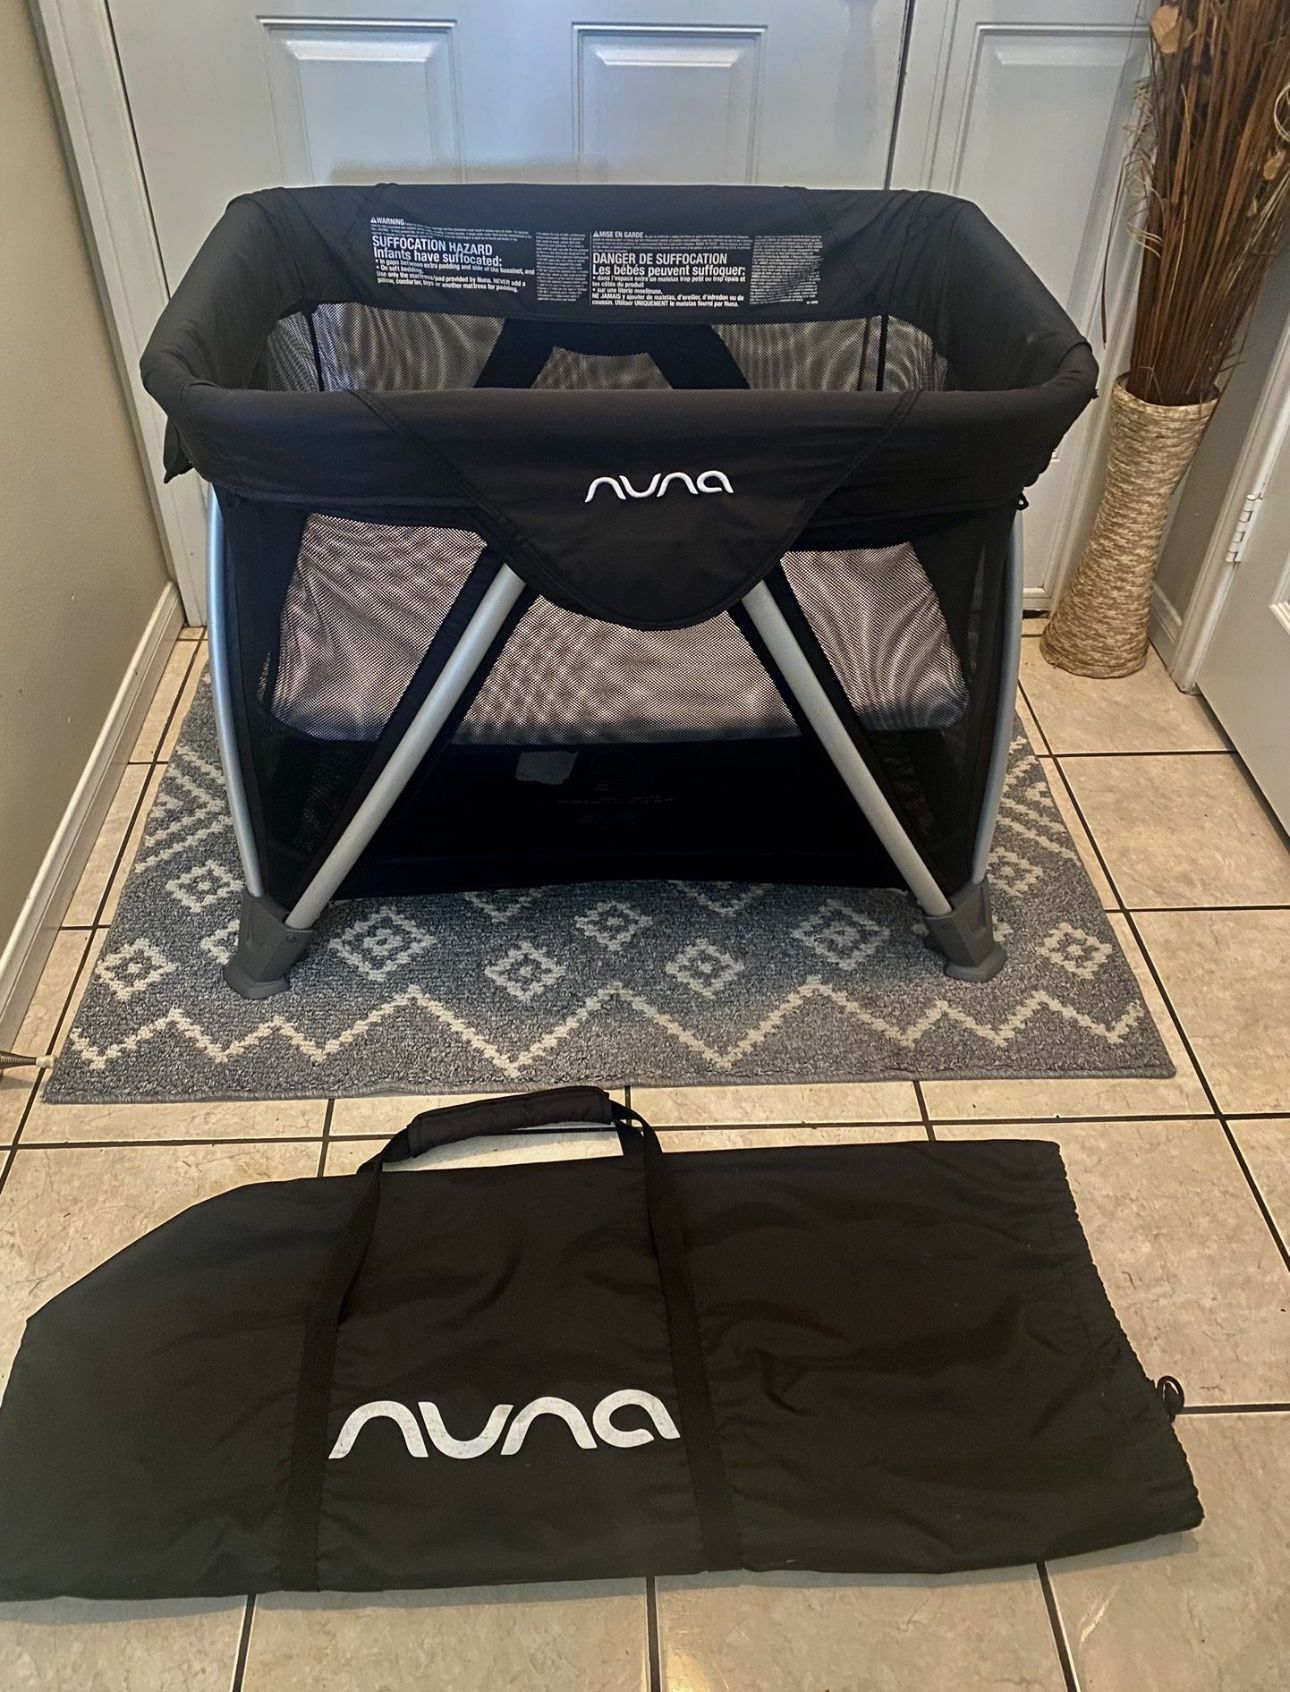 Nuna Mini Playpen/ Play Yard Black With Carry Bag Included 